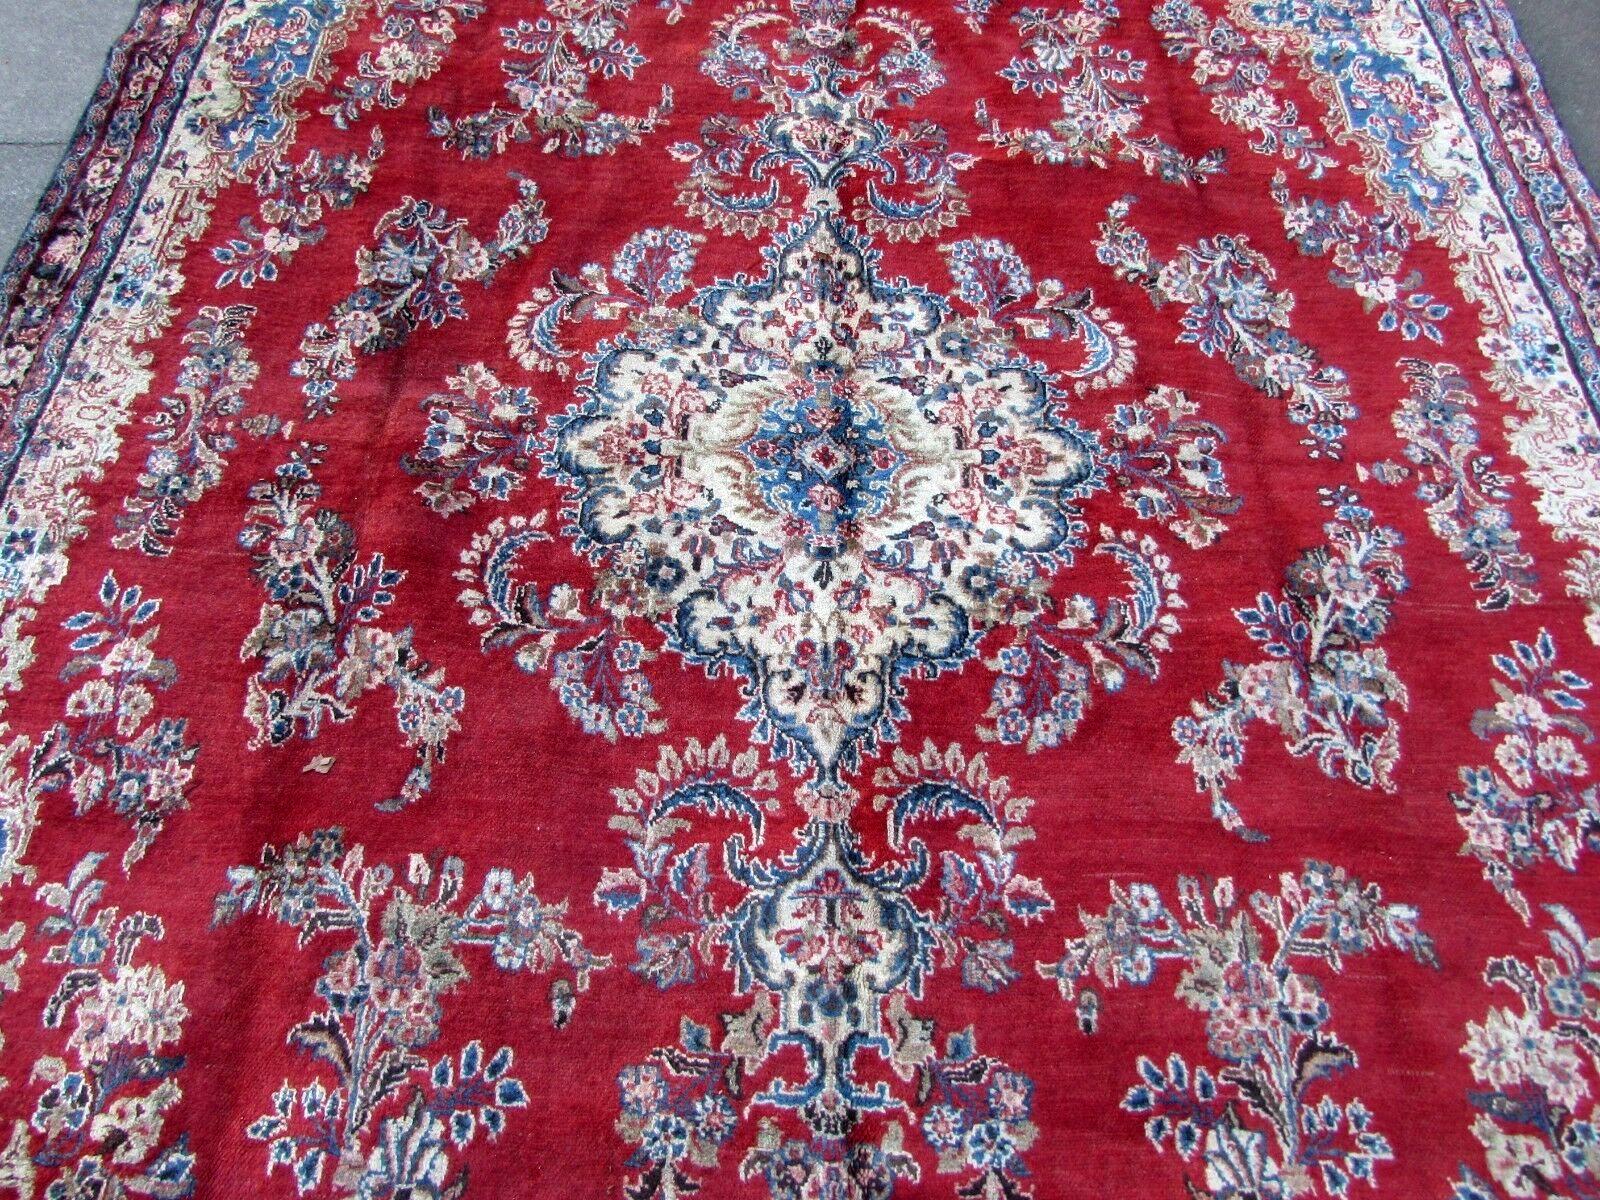 Handmade vintage Kerman rug in red and blue wool. The rug is from the end of the 20th century, it is in original good condition.

- Condition: original good,

- circa 1970s,

- Size: 7.5' x 14.3' (223cm x 428cm),

- Material: wool,

-